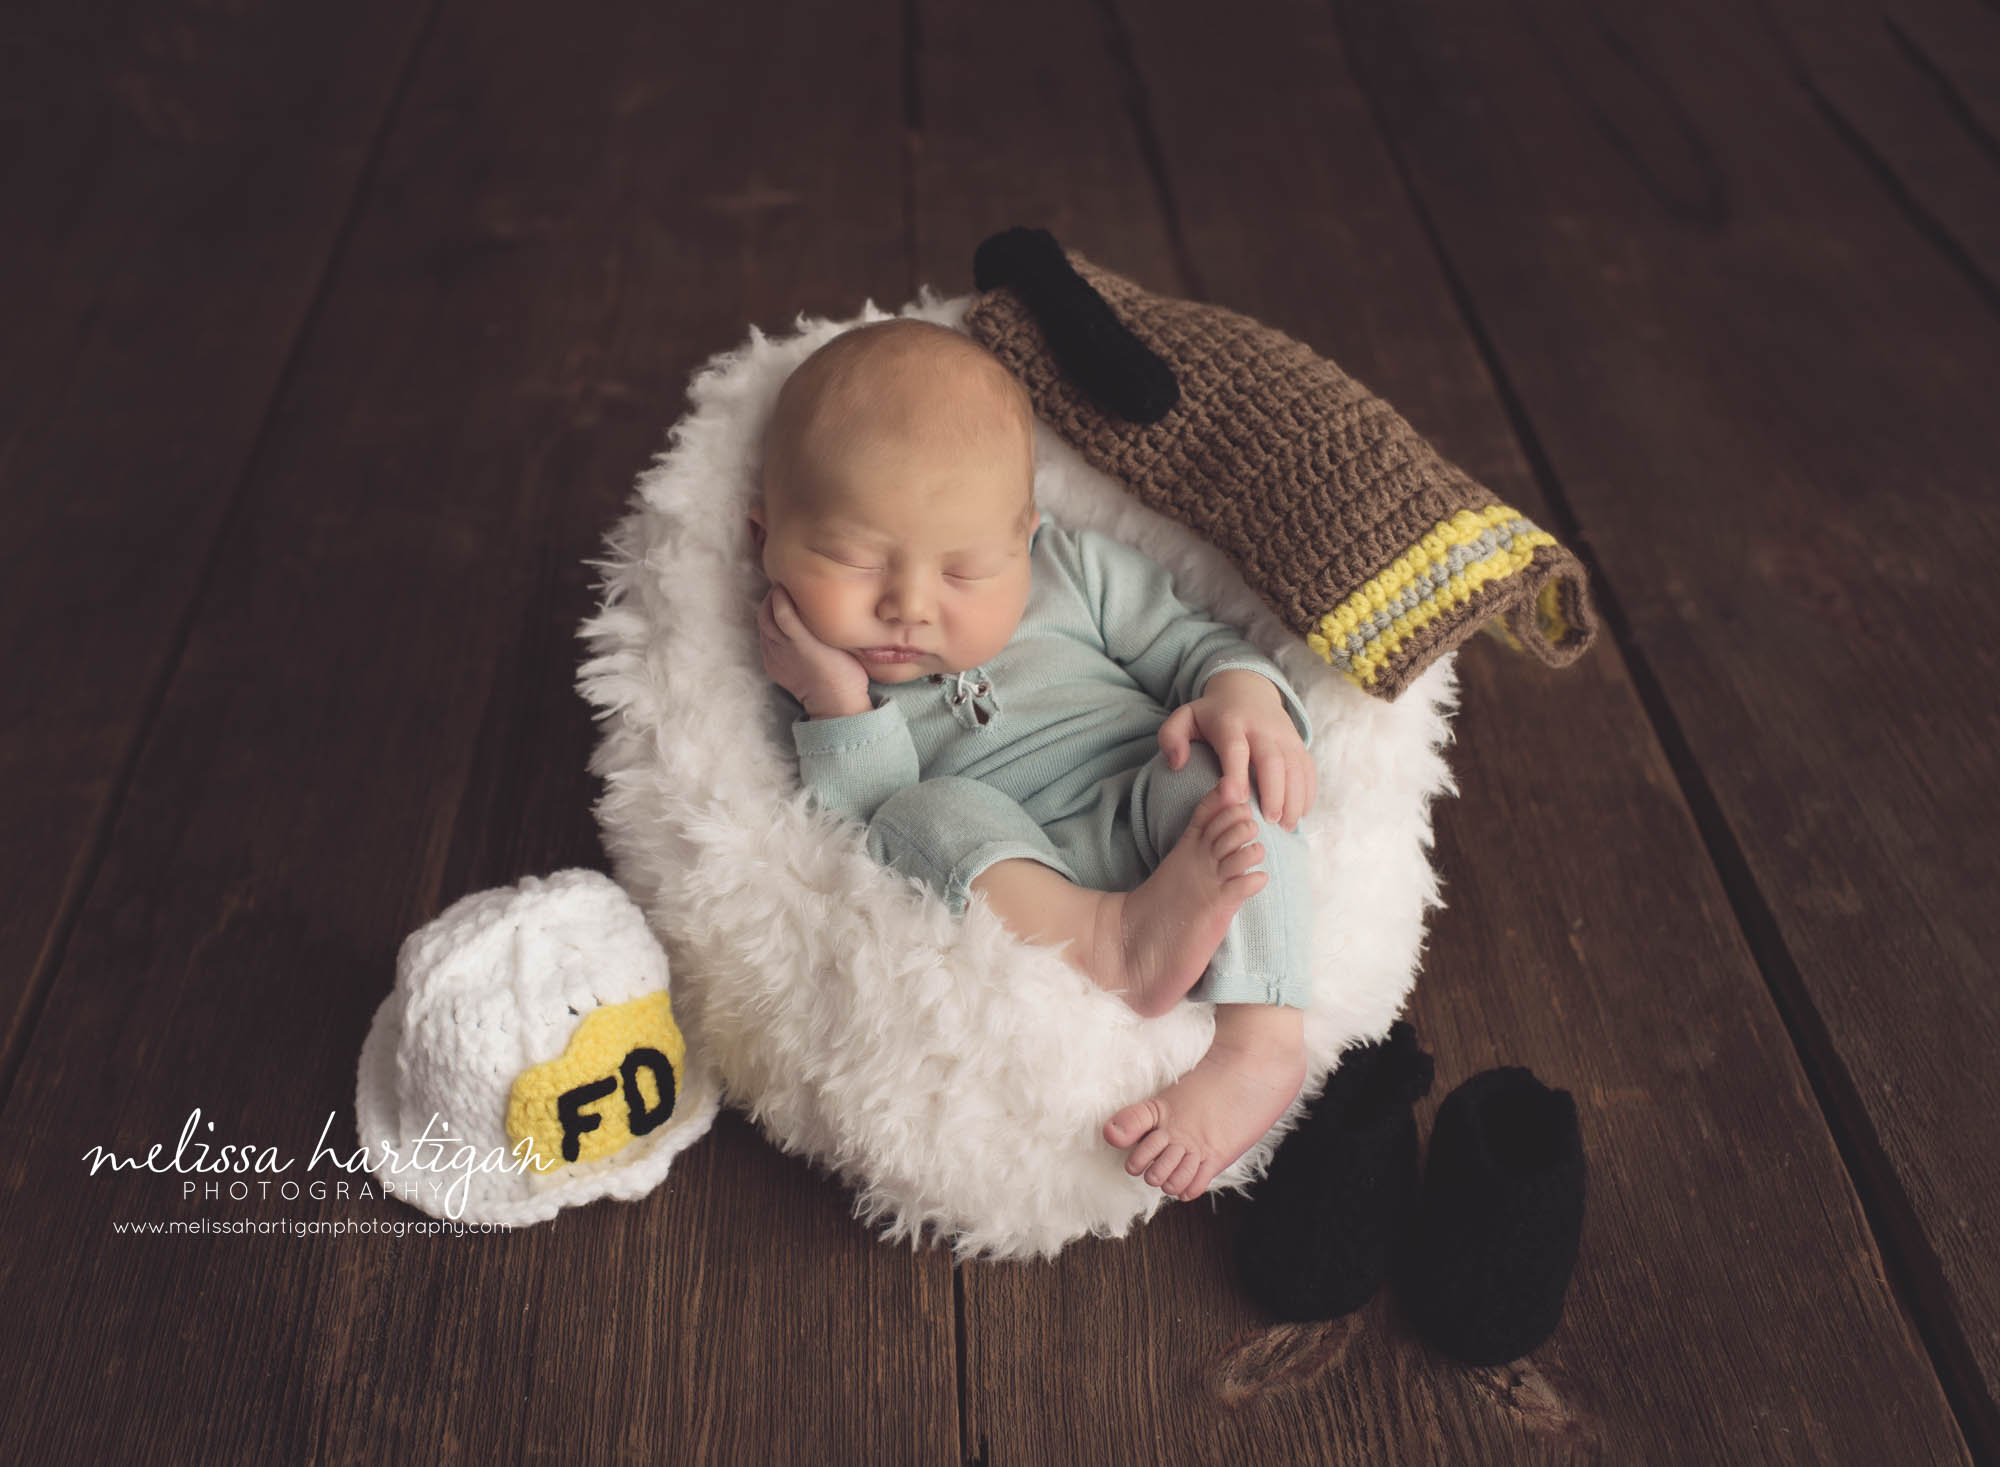 Melissa Hartigan Photography CT Newborn Photographer Braeden Newborn Session baby boy sleeping wearing knit blue onesie on fluffy white blanket with knit firefighter outfit placed around him